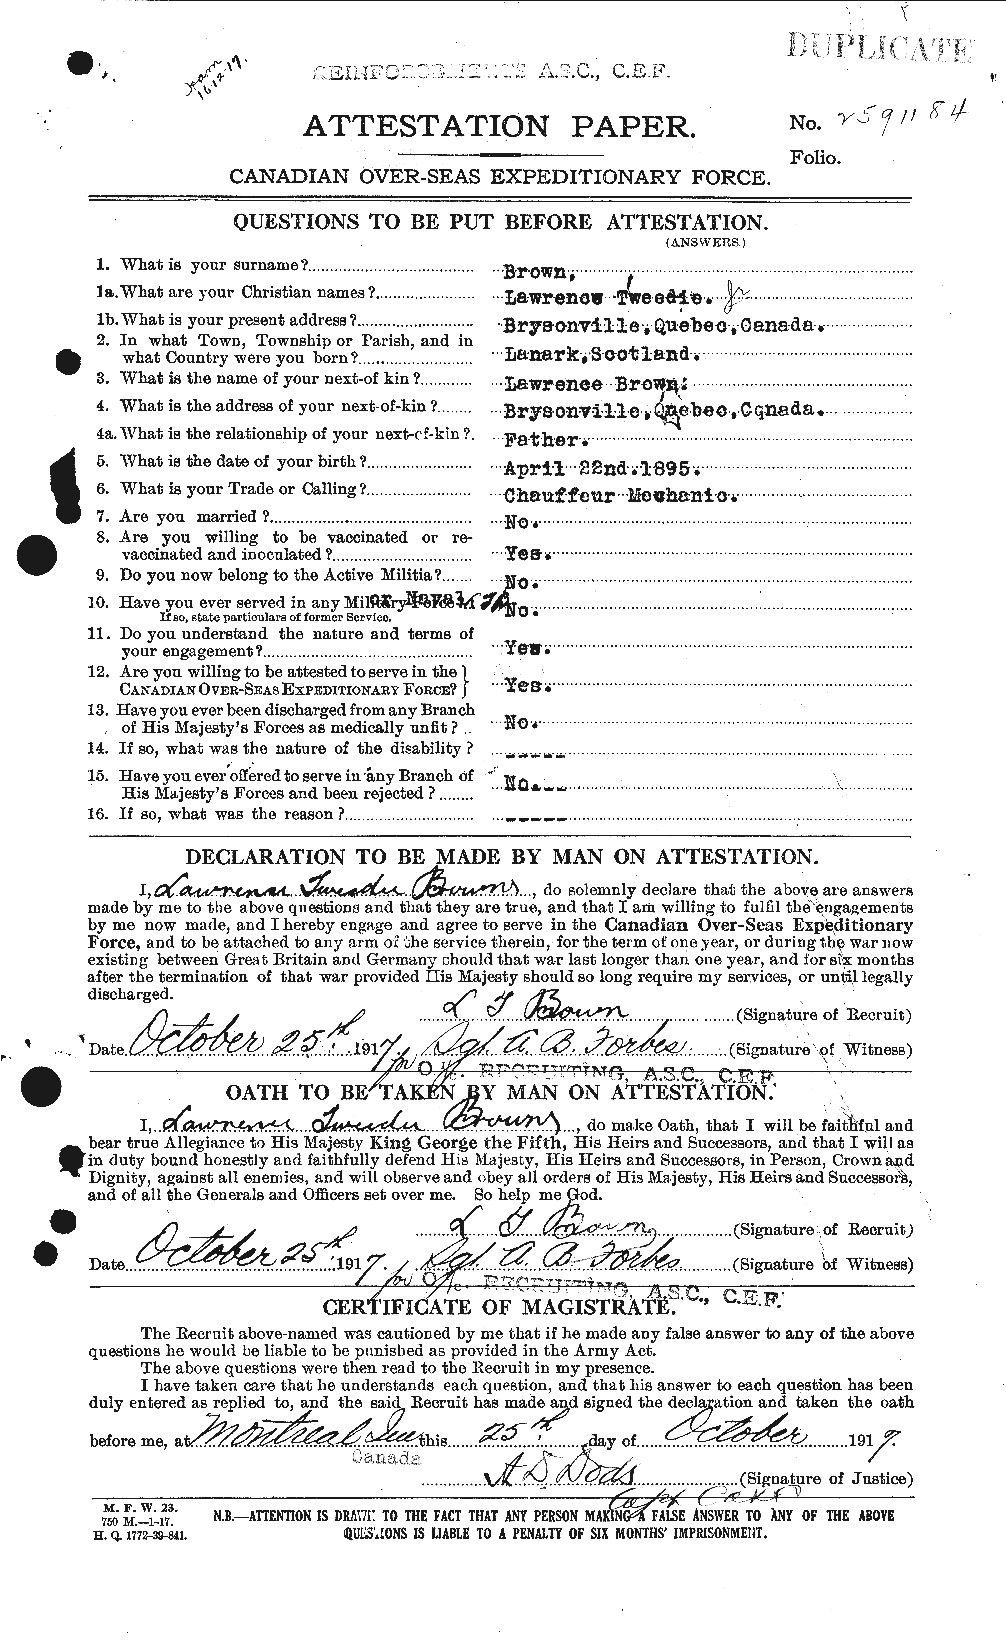 Personnel Records of the First World War - CEF 266273a